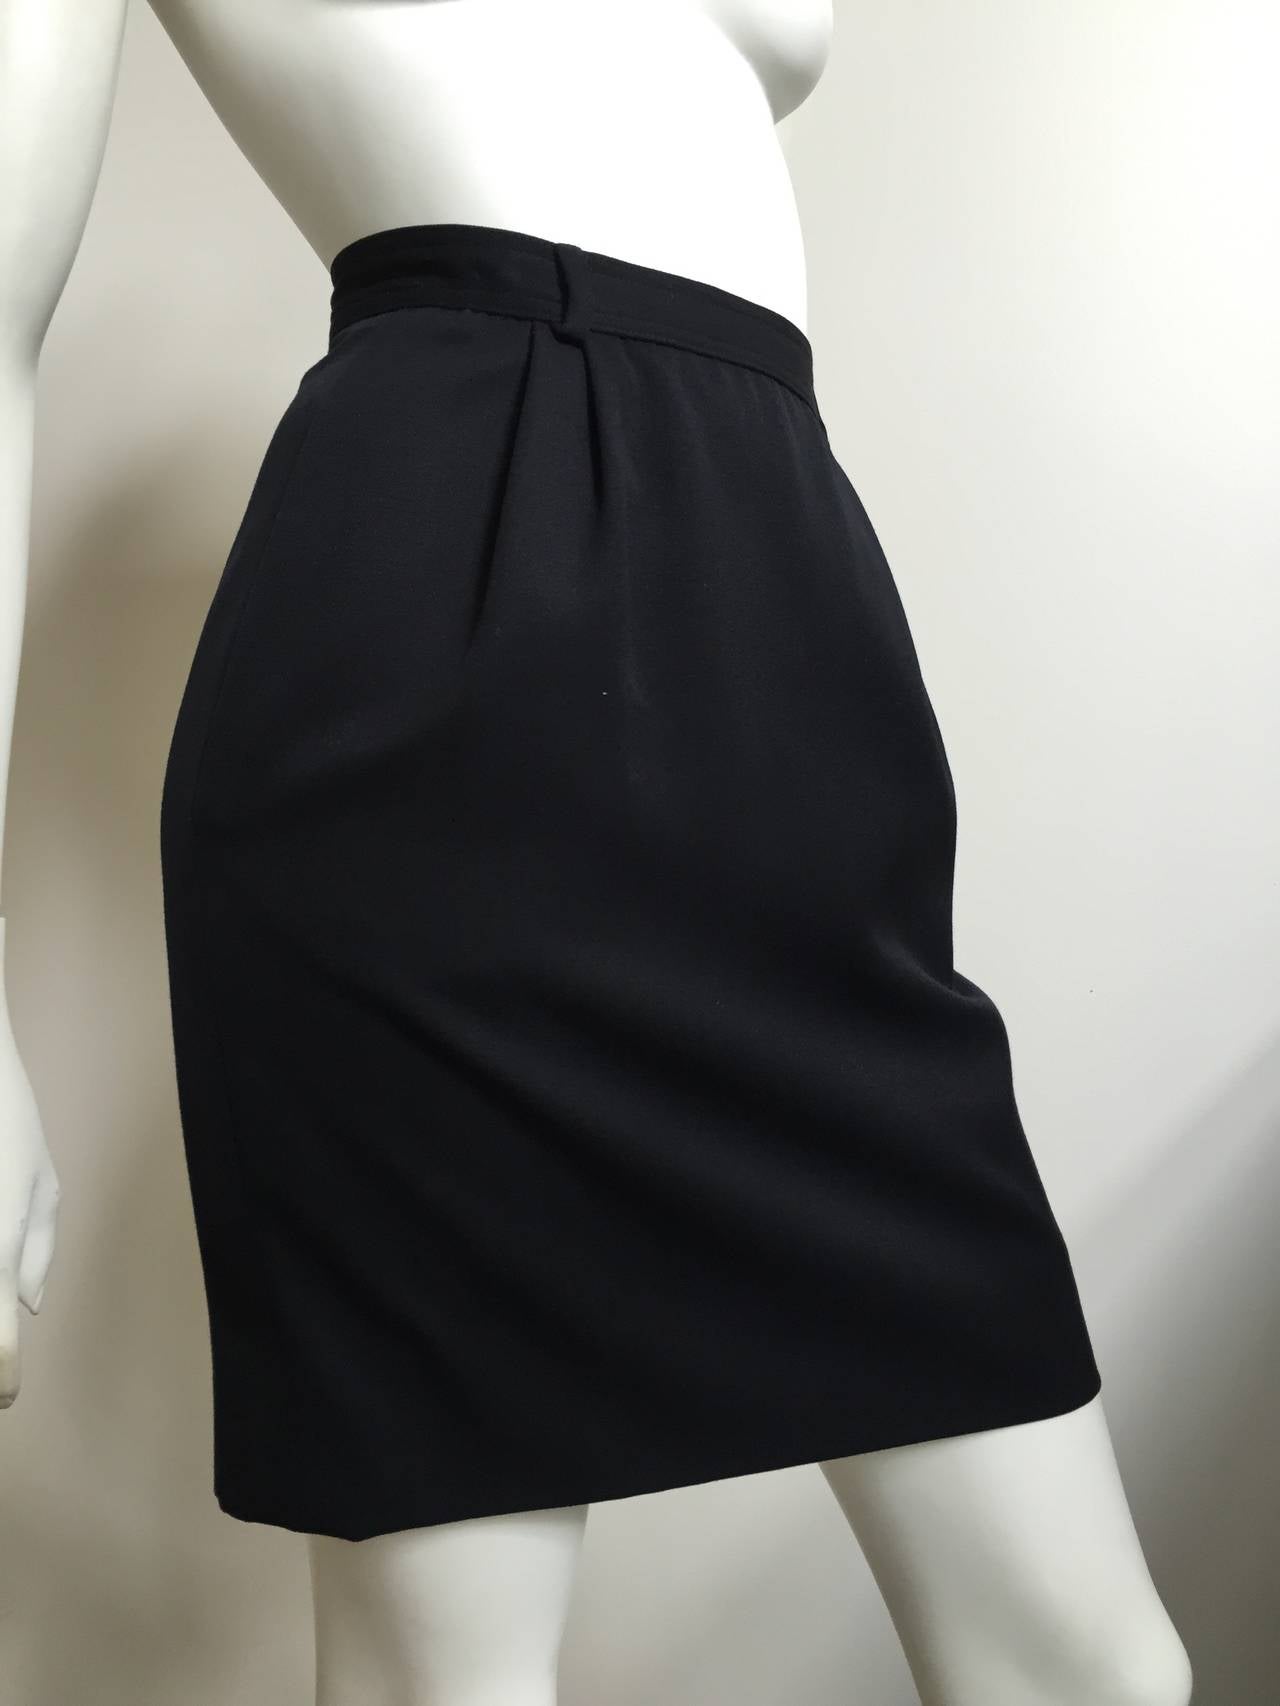 Valentino 80s Black Wool Skirt With Pockets Size 6. 4